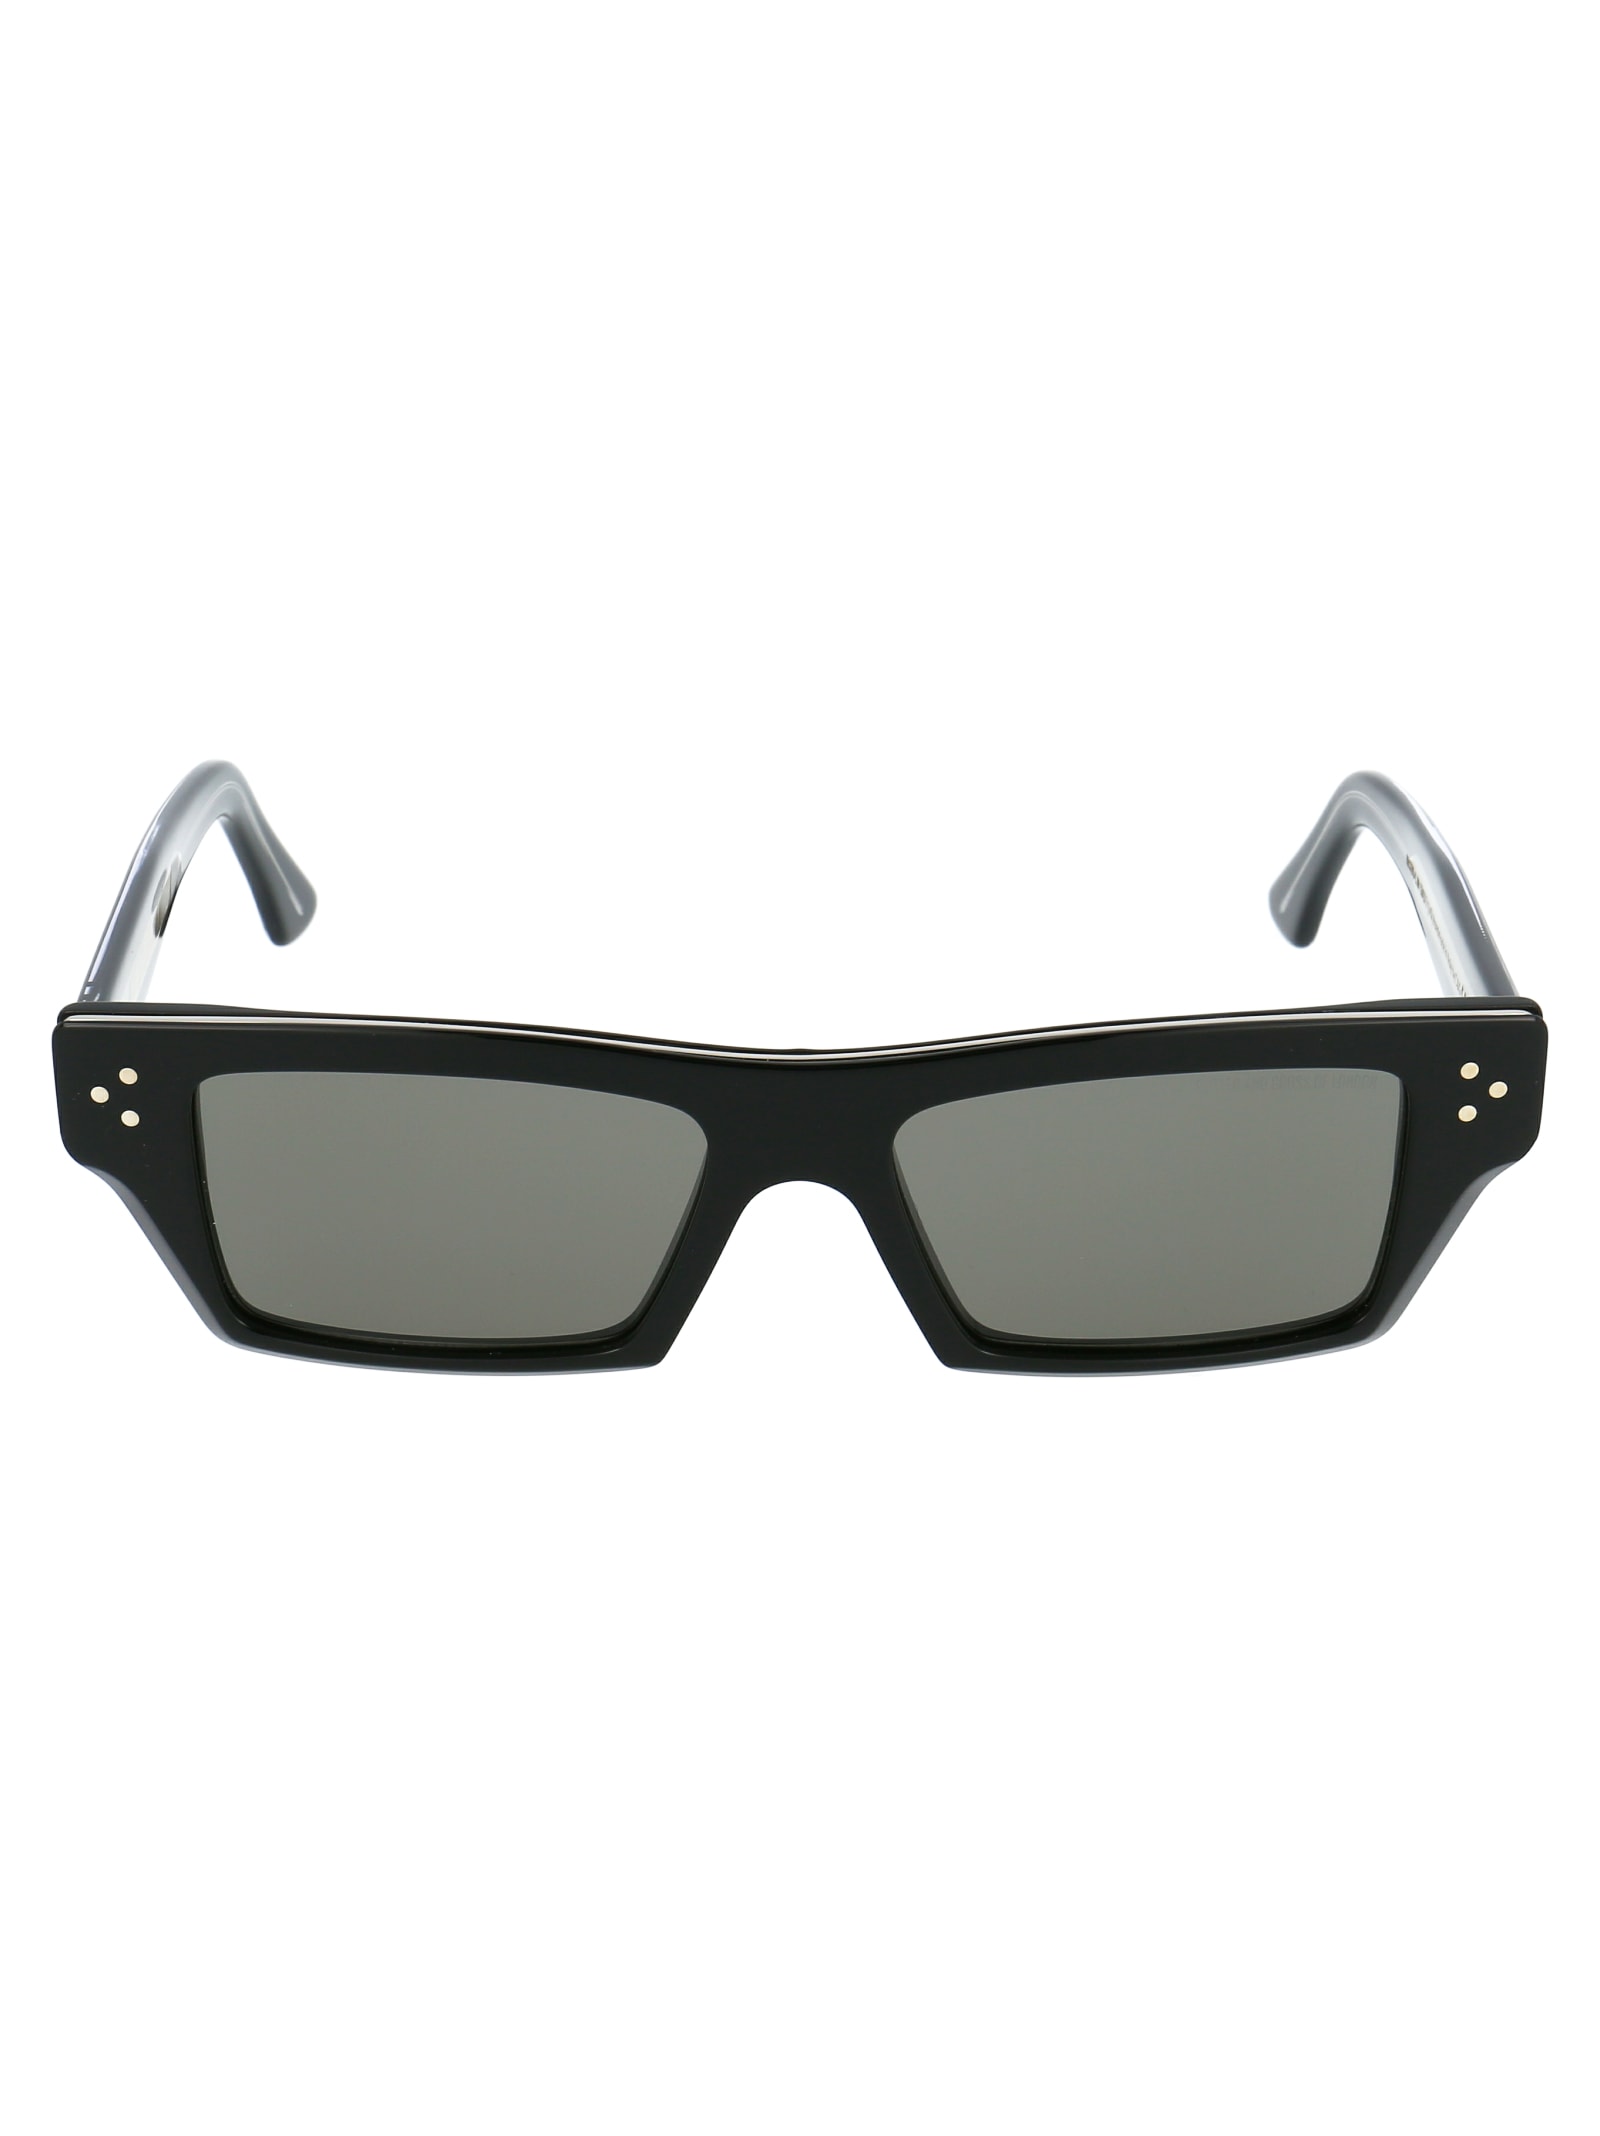 Cutler And Gross 1295 Sunglasses In Black